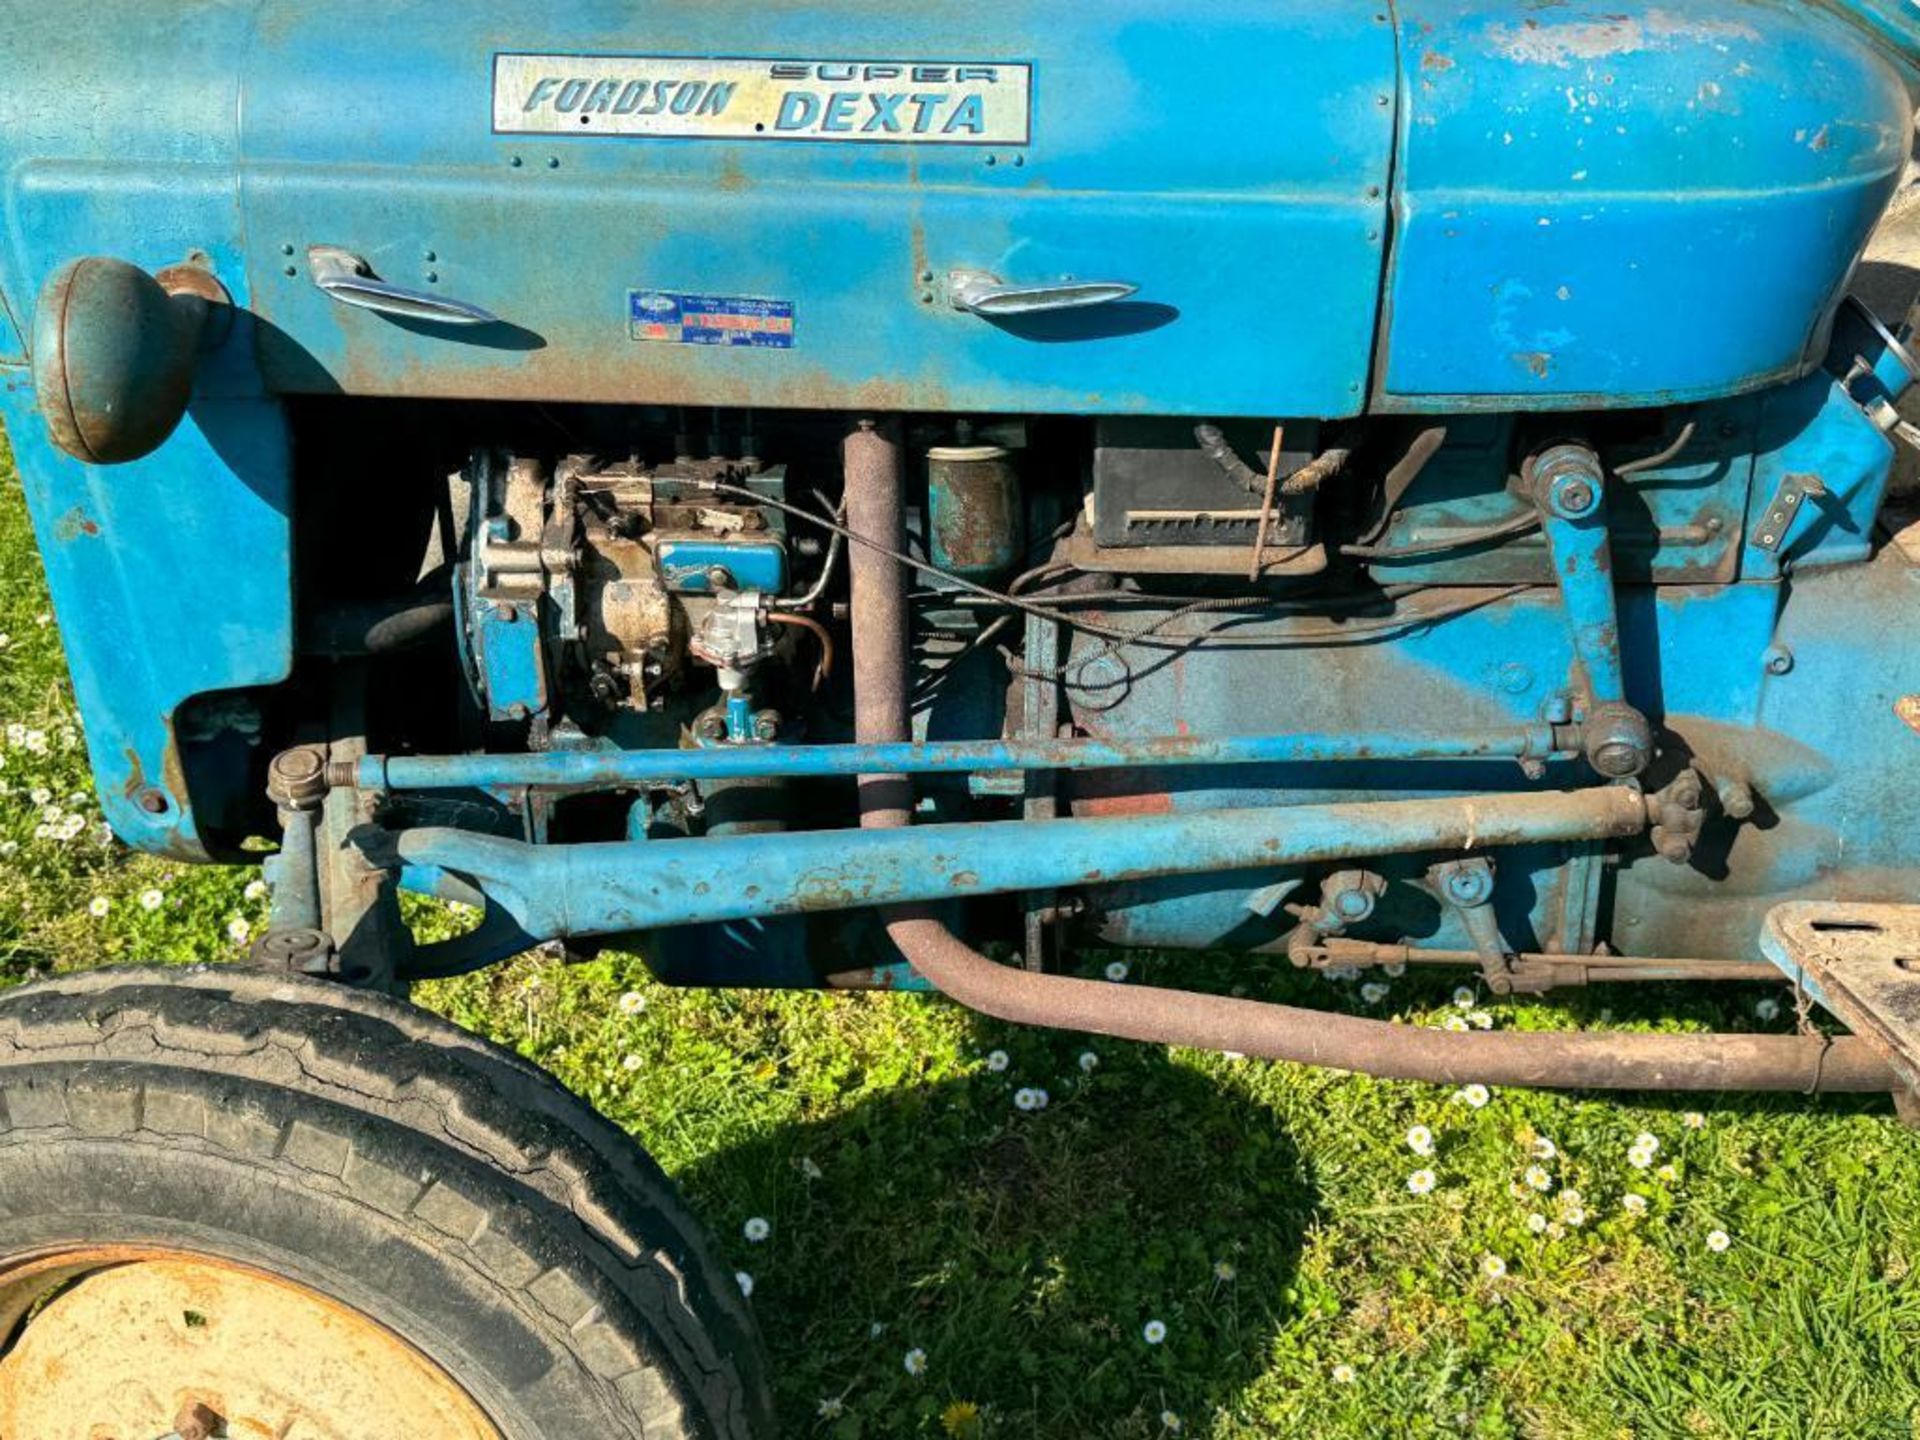 Fordson Super Dexta 2wd diesel tractor with rear linkage, PTO and underslung exhaust on 12.4-28 rear - Image 13 of 16